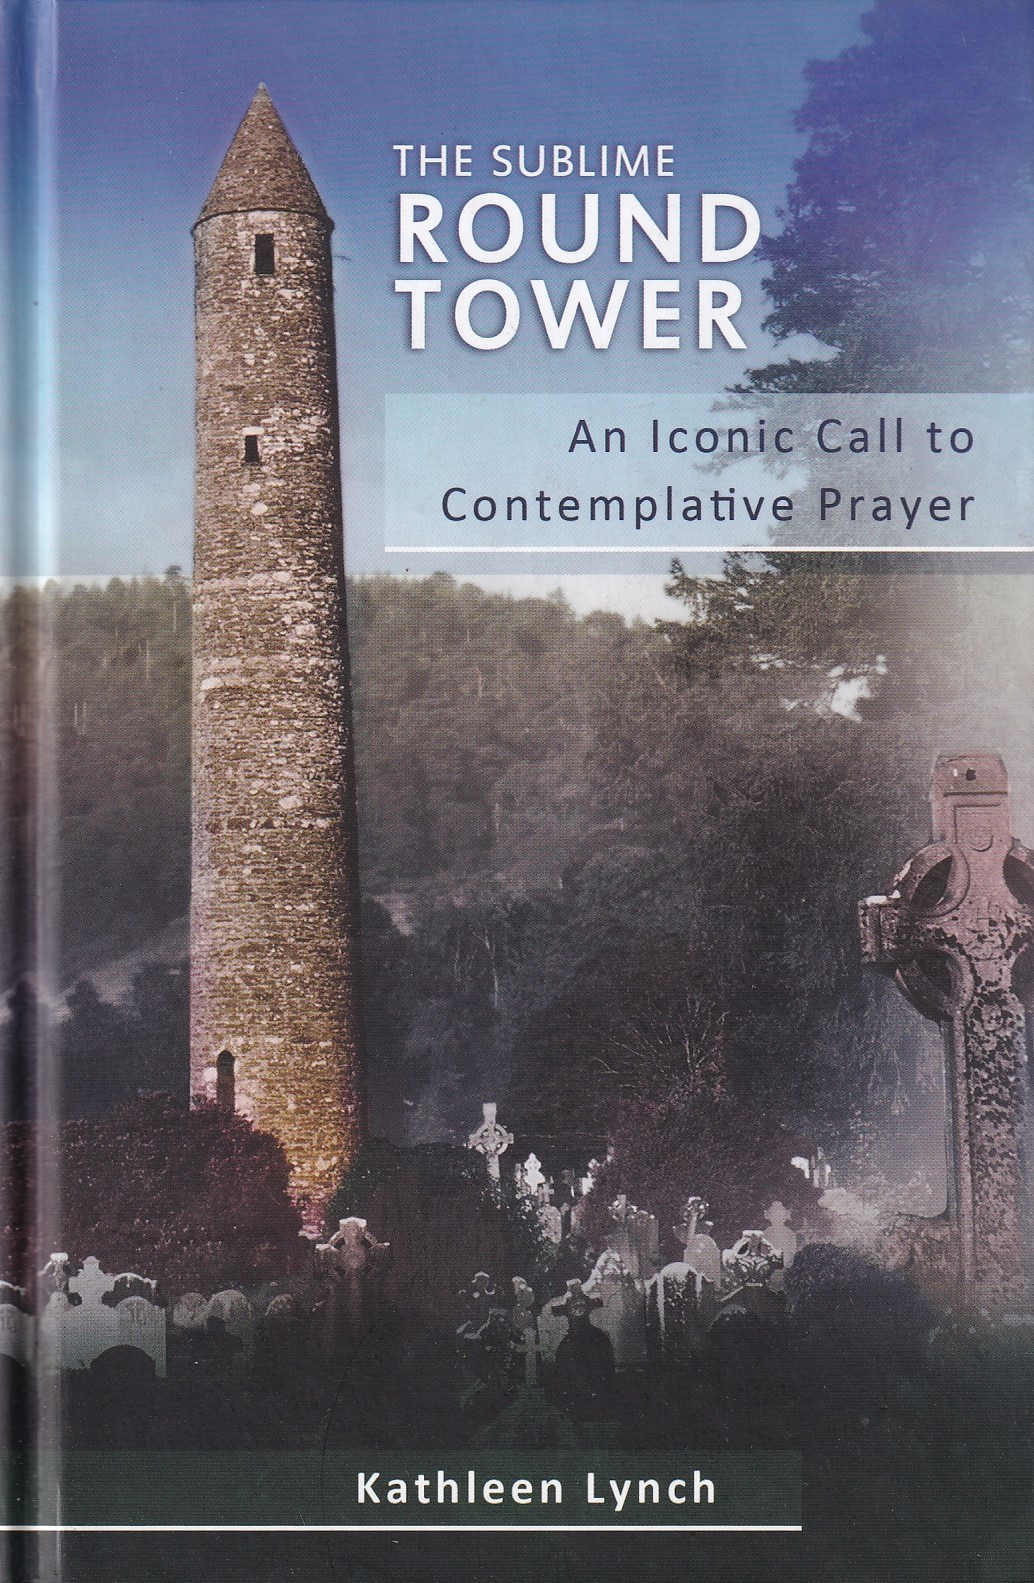 The Sublime Round Tower: An Iconic Call to Contemplative Prayer | Kathleen Lynch | Charlie Byrne's